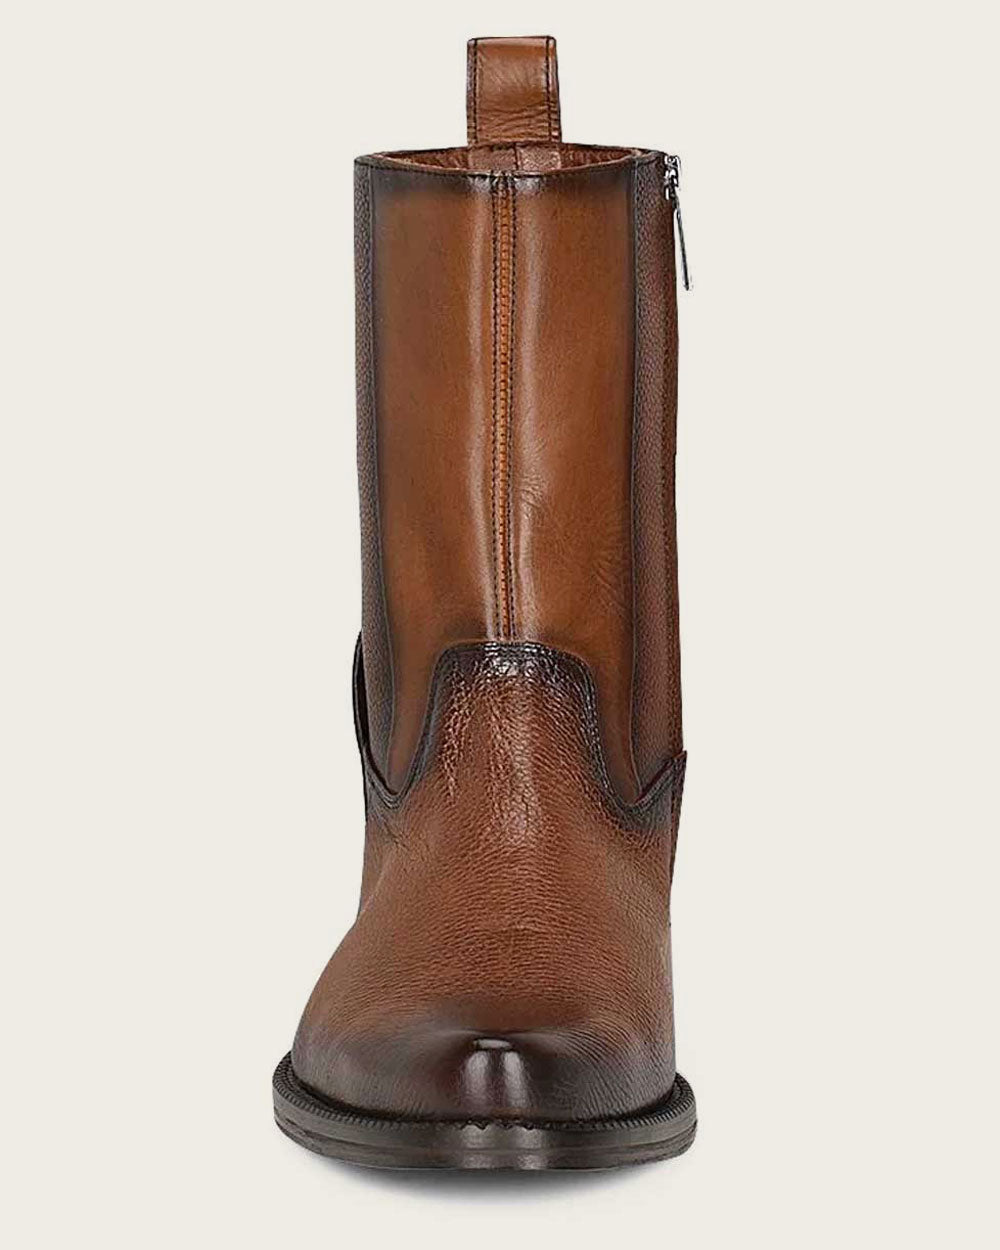 Soft Deer Leather: Cuadra boots mold to your foot for unmatched comfort.